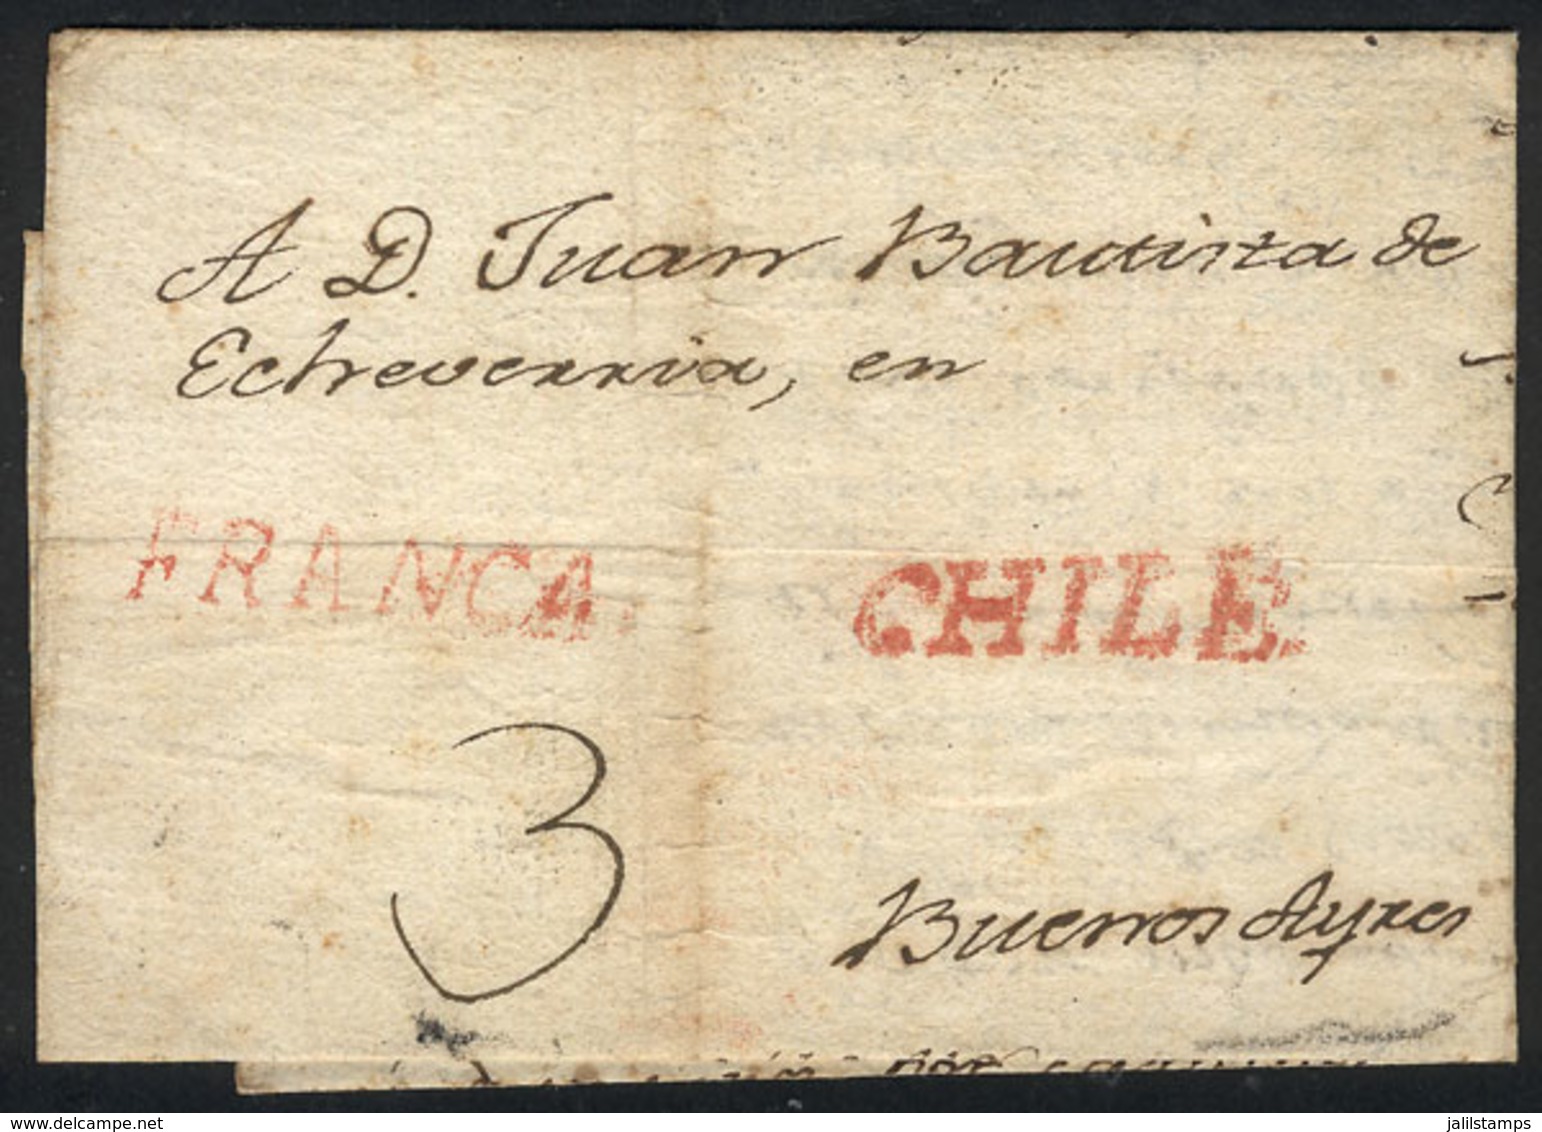 481 CHILE: "First Page Of A Letter Sent From Santiago De Chile To Buenos Aires On 23/MAR/1814, With ""FRANCA"" And ""CHI - Chili